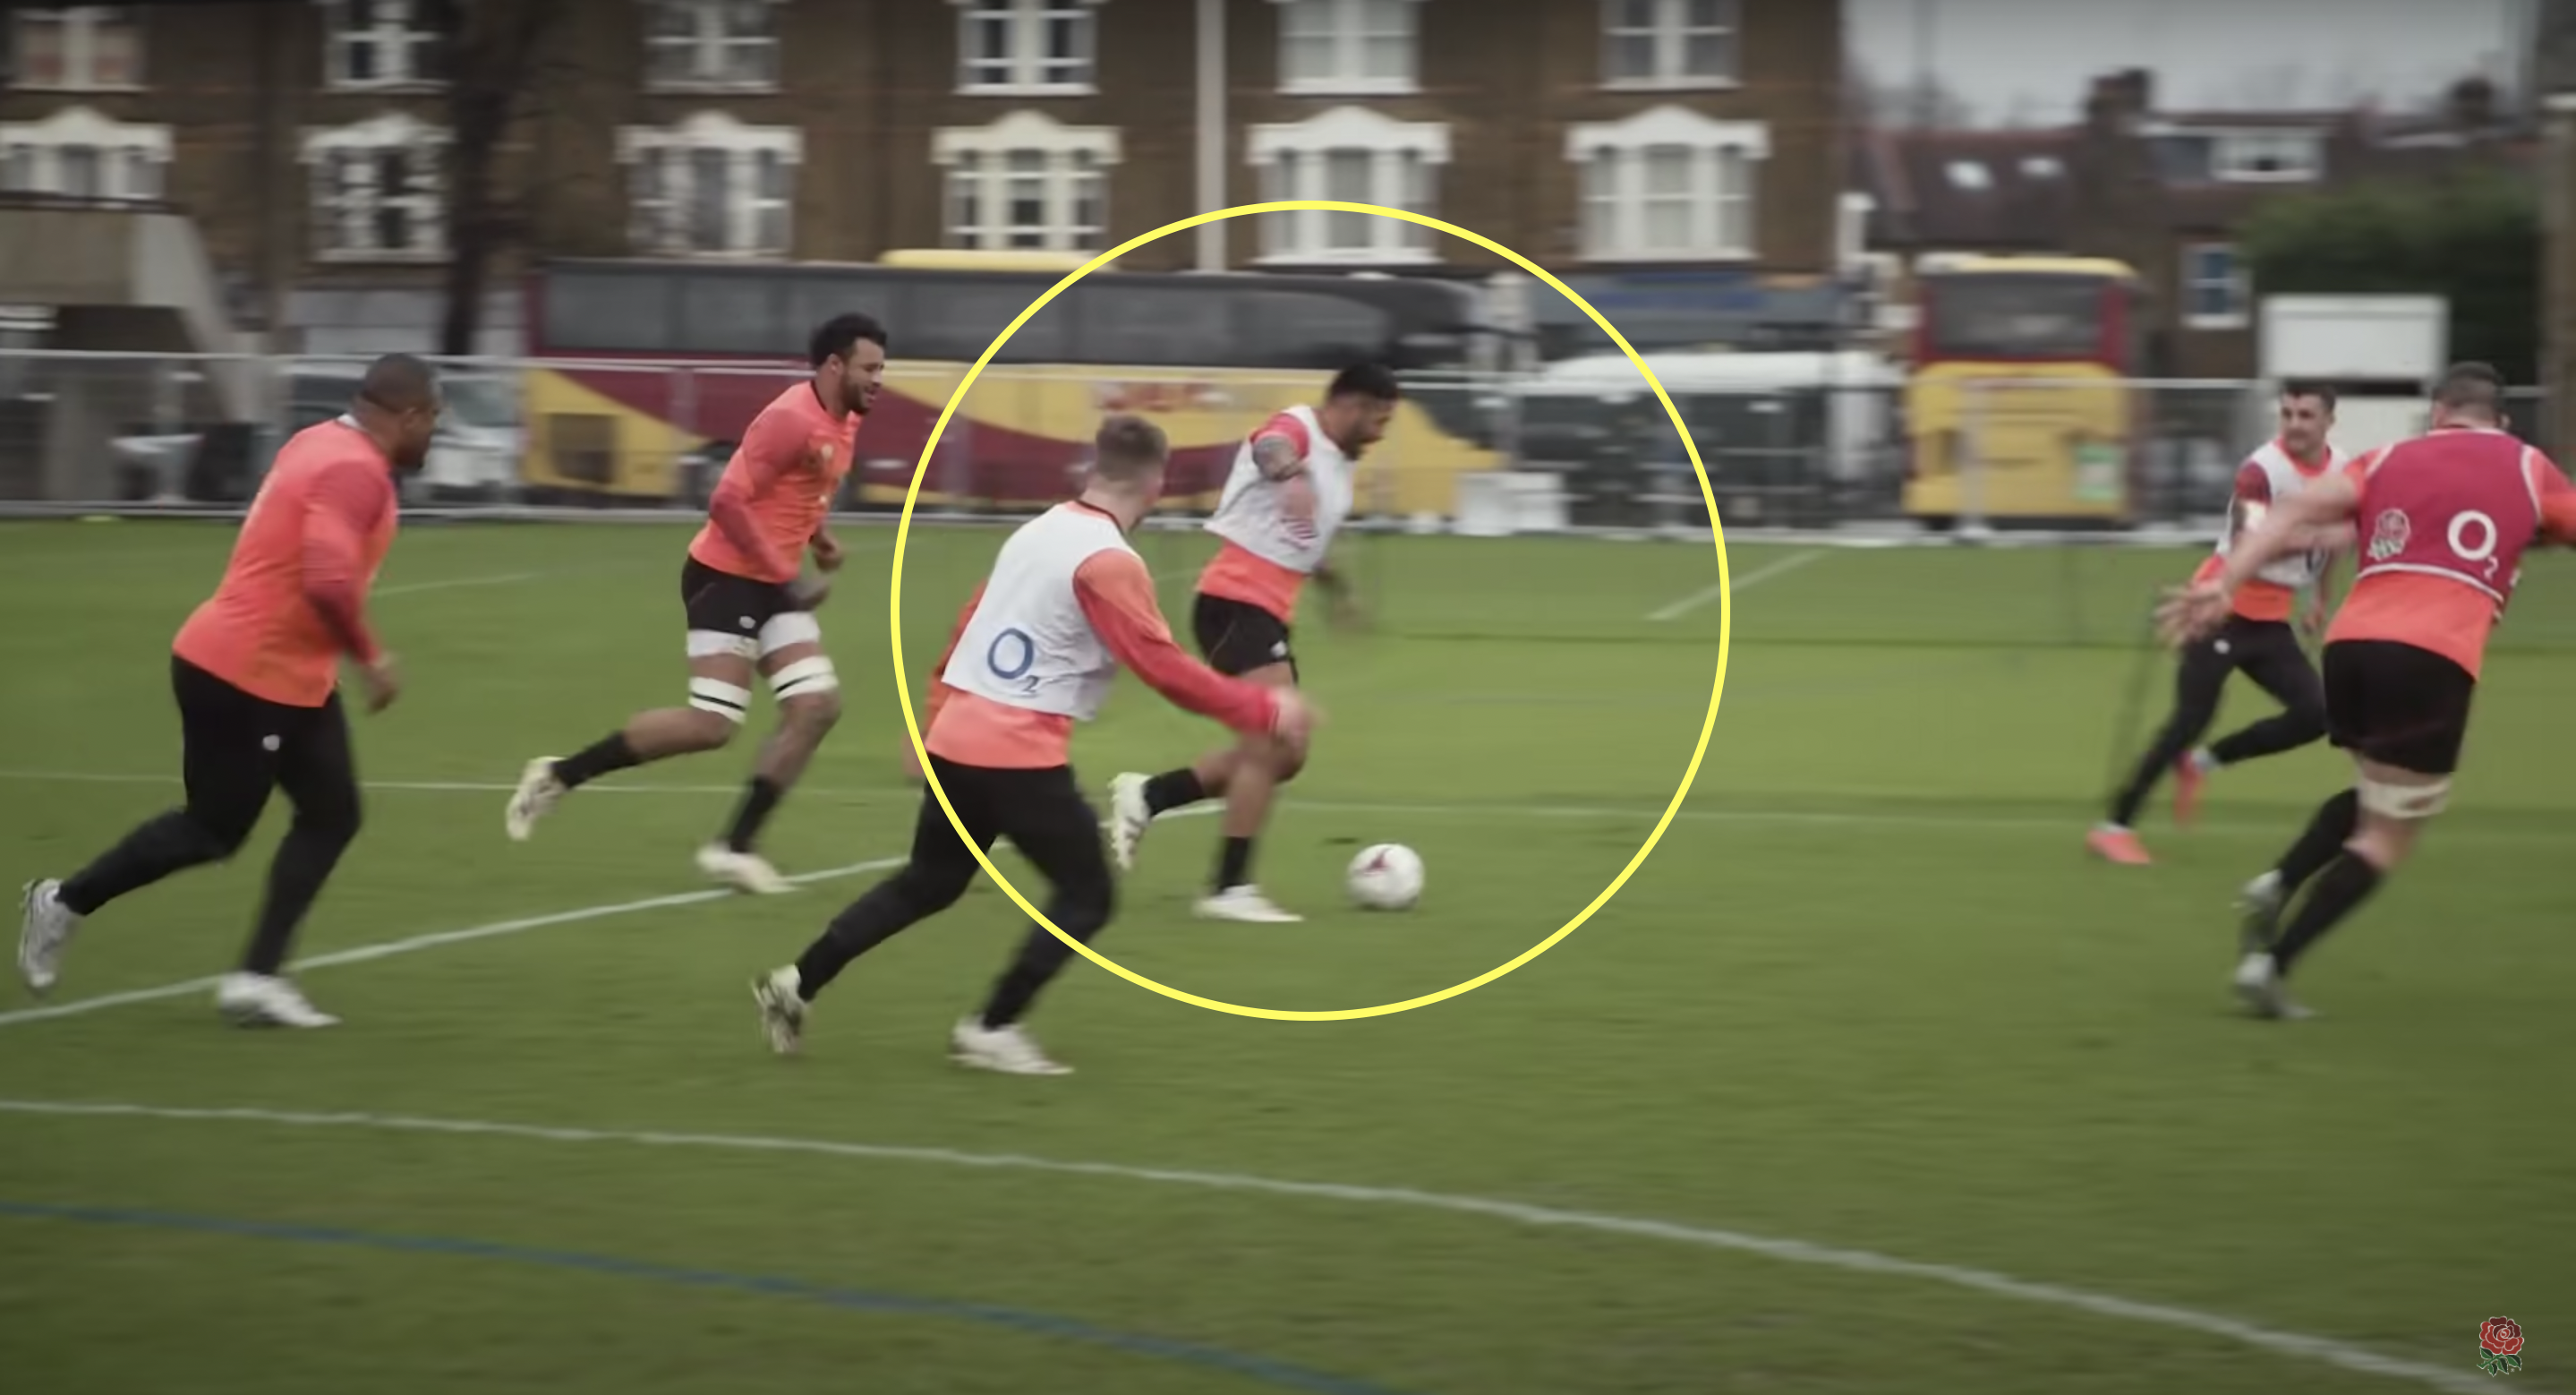 Manu Tuilagi is as terrifying playing football as he is playing rugby